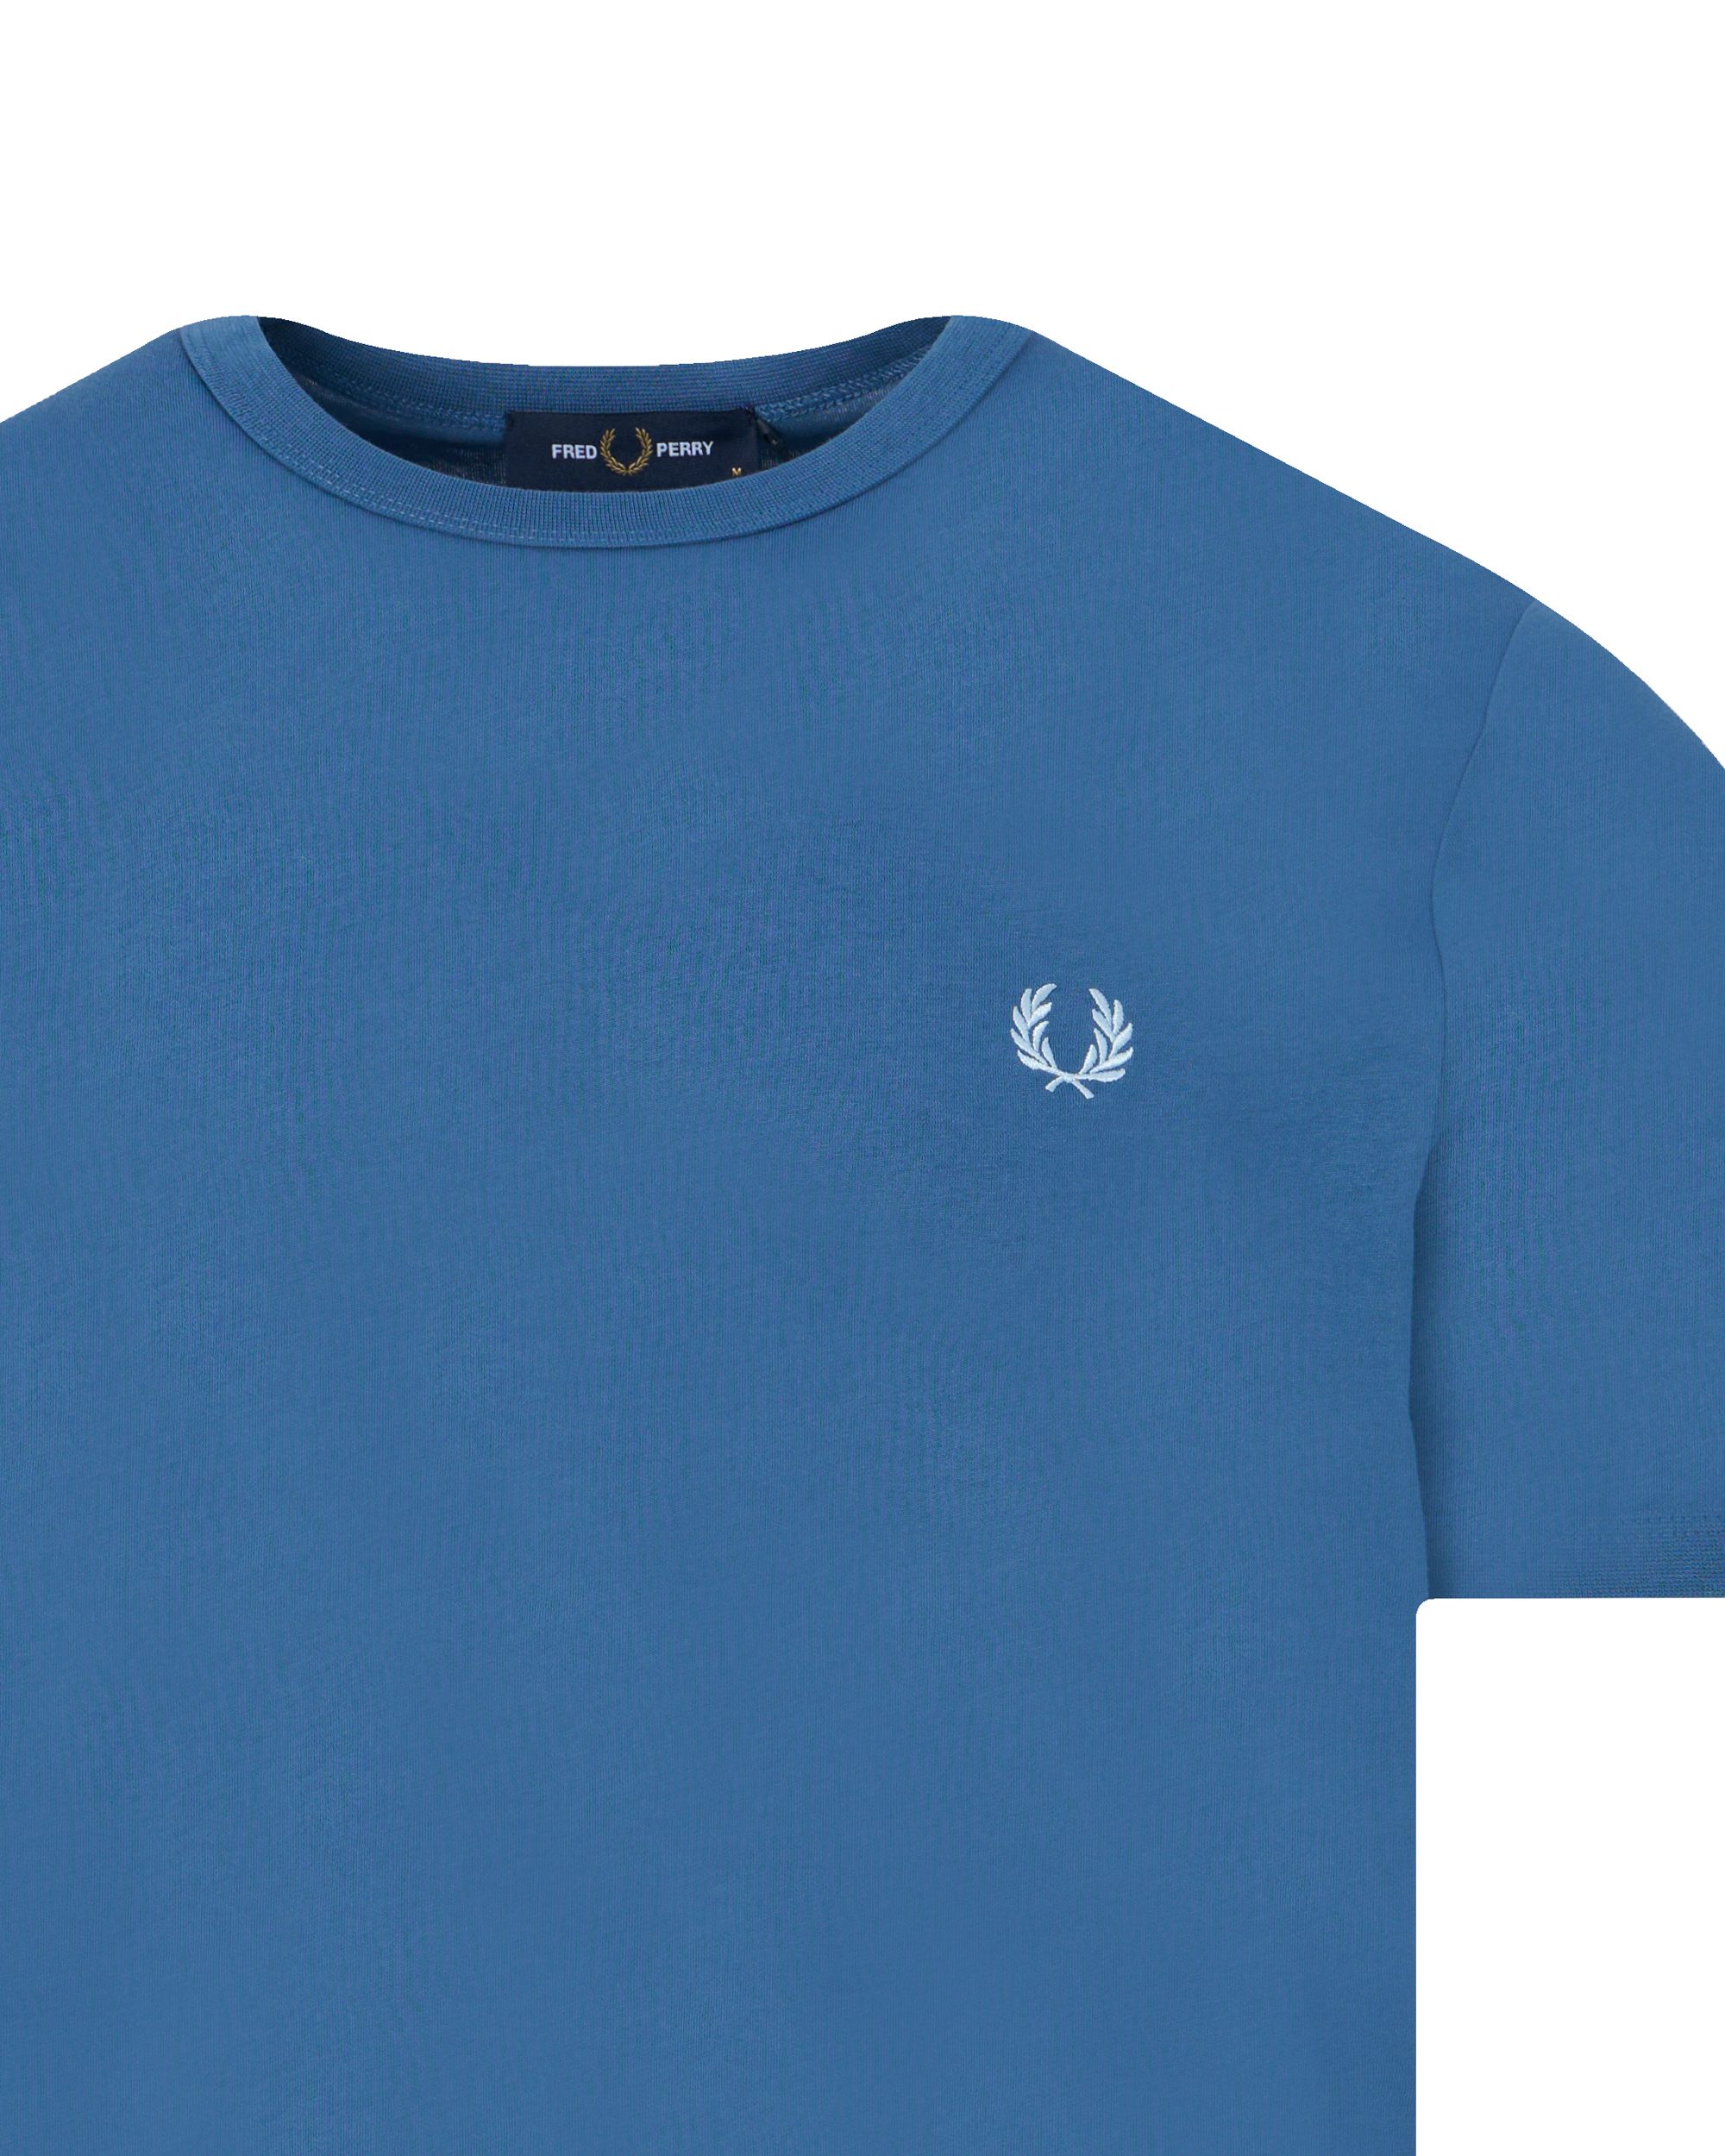 Fred Perry T-shirt KM Donker blauw 091947-001-L